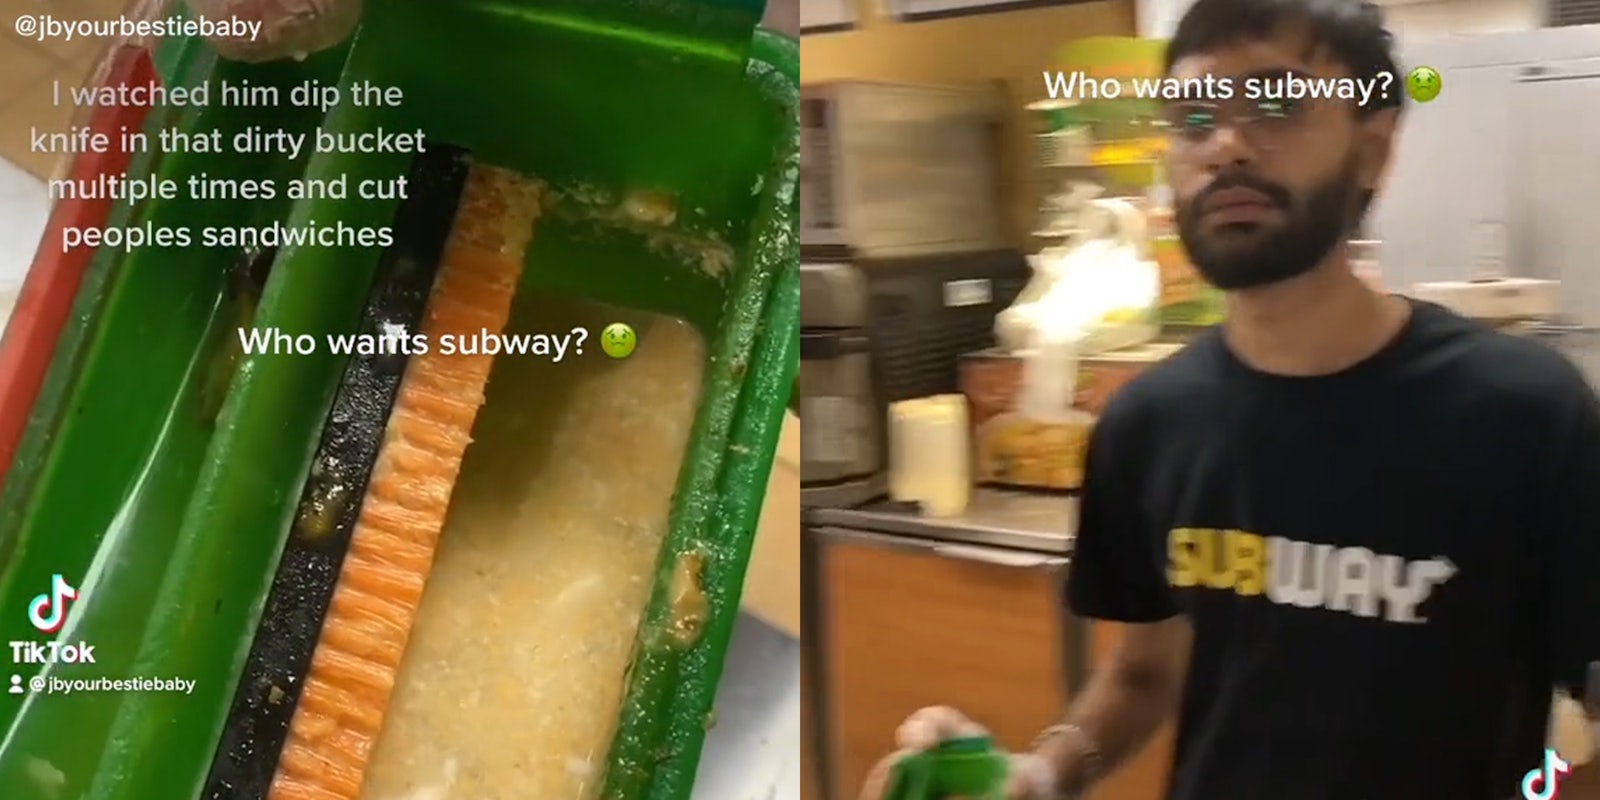 bucket of dirty water with caption 'I watched him dip the knife in that dirty bucket multiple times and cut peoples sandwiches. Who wants subway?' (l) subway worker holding bucket (r)